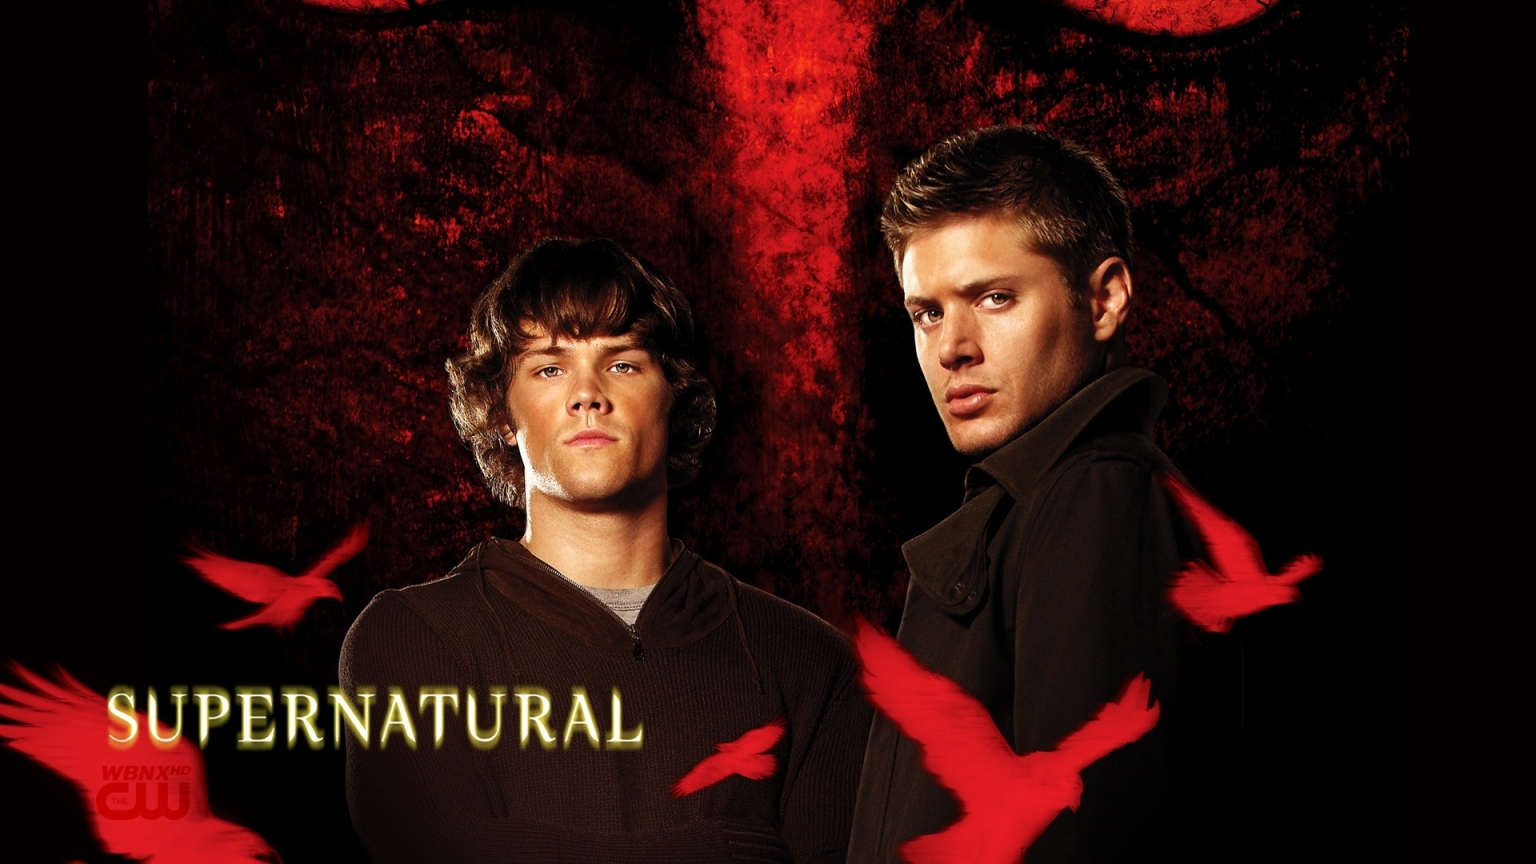 Supernatural Characters for 1536 x 864 HDTV resolution